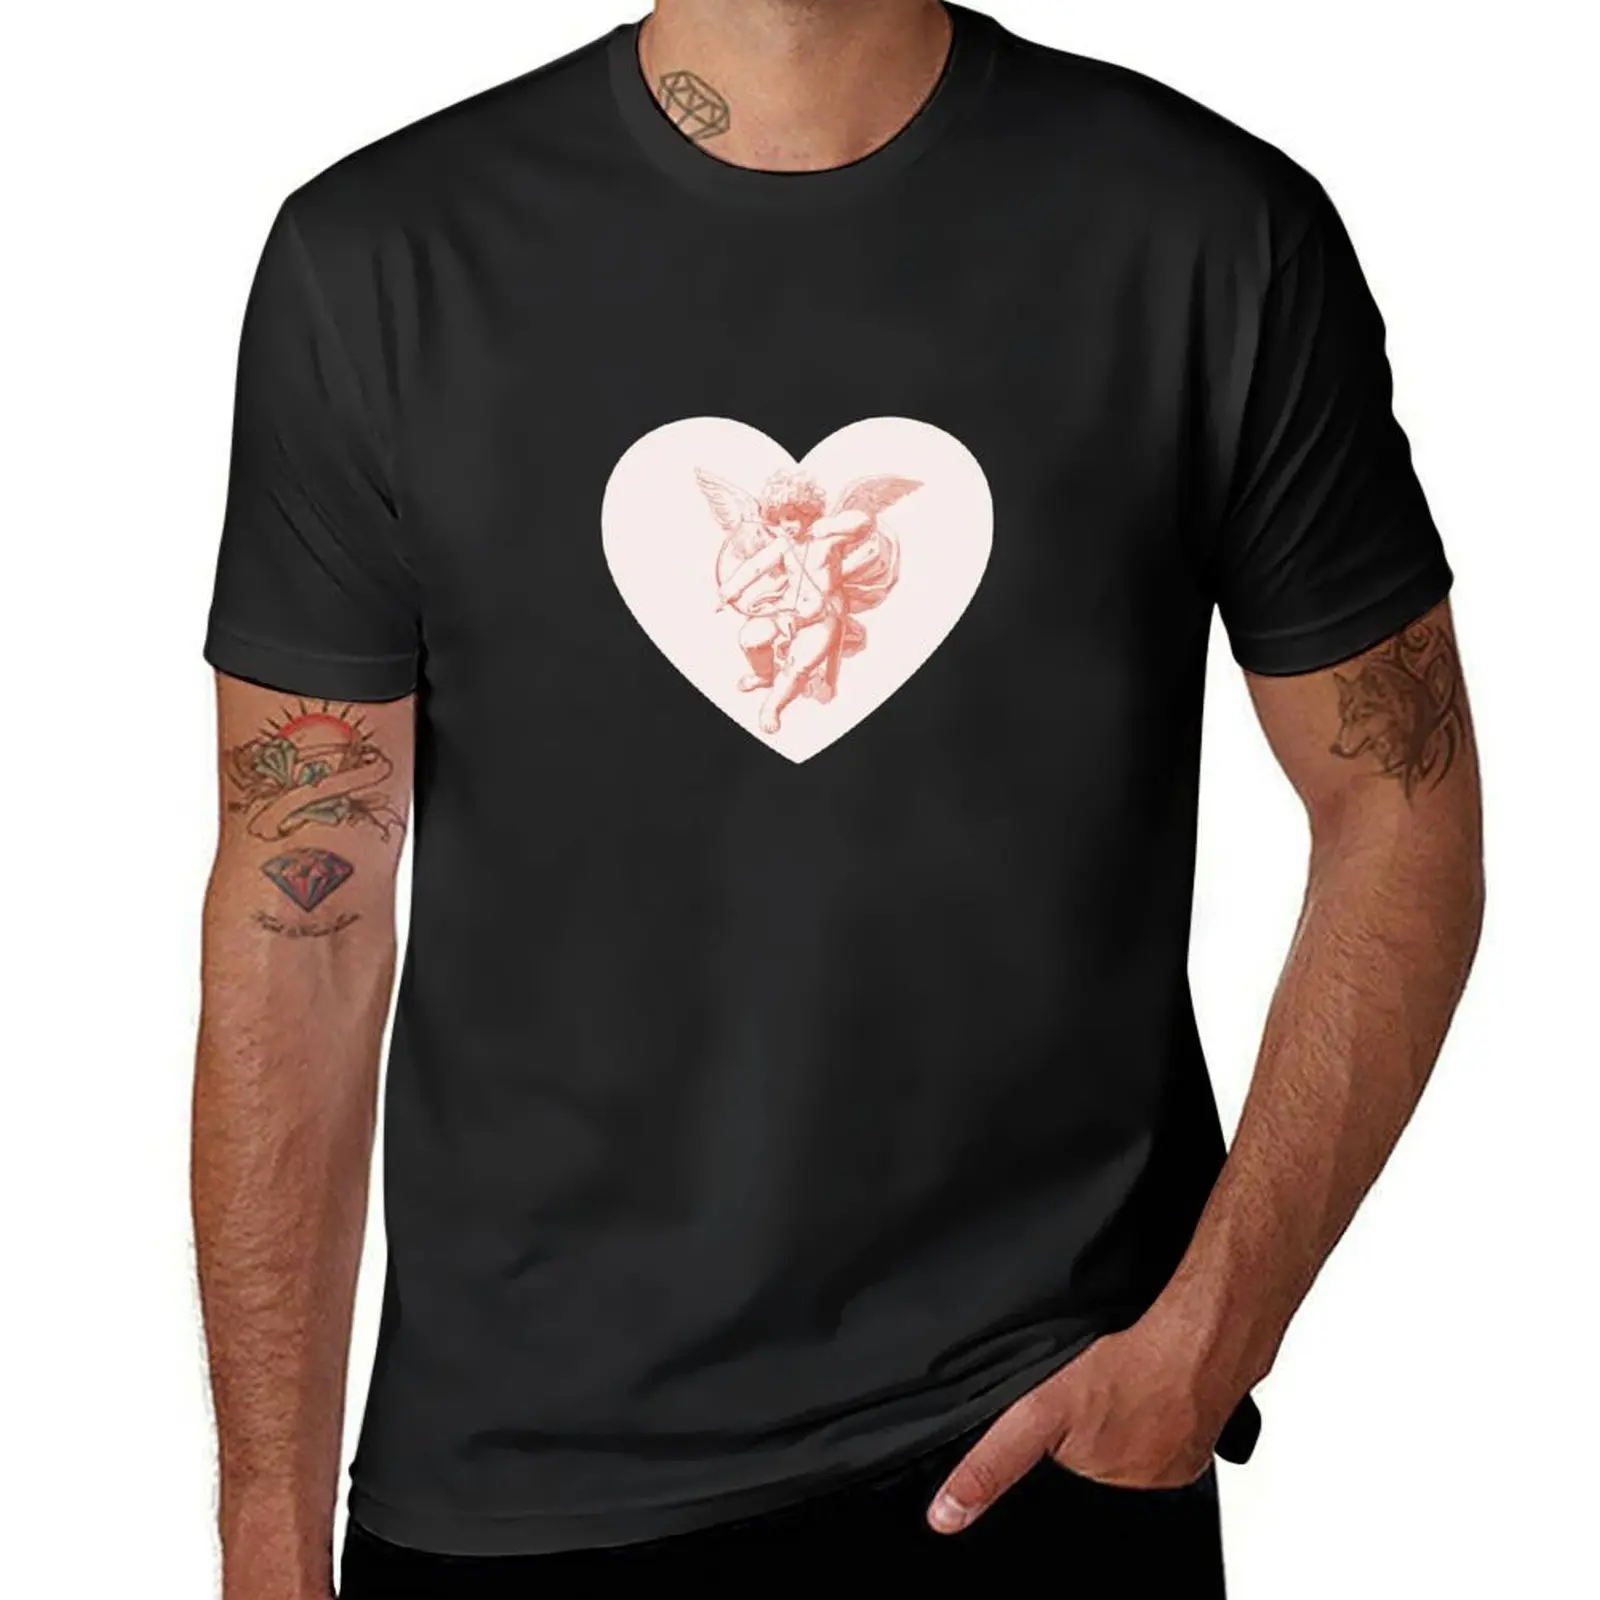 

Aesthetic Angel Cupid Valentine's Day Heart T-Shirt oversized boys animal print vintage clothes Blouse men t shirt